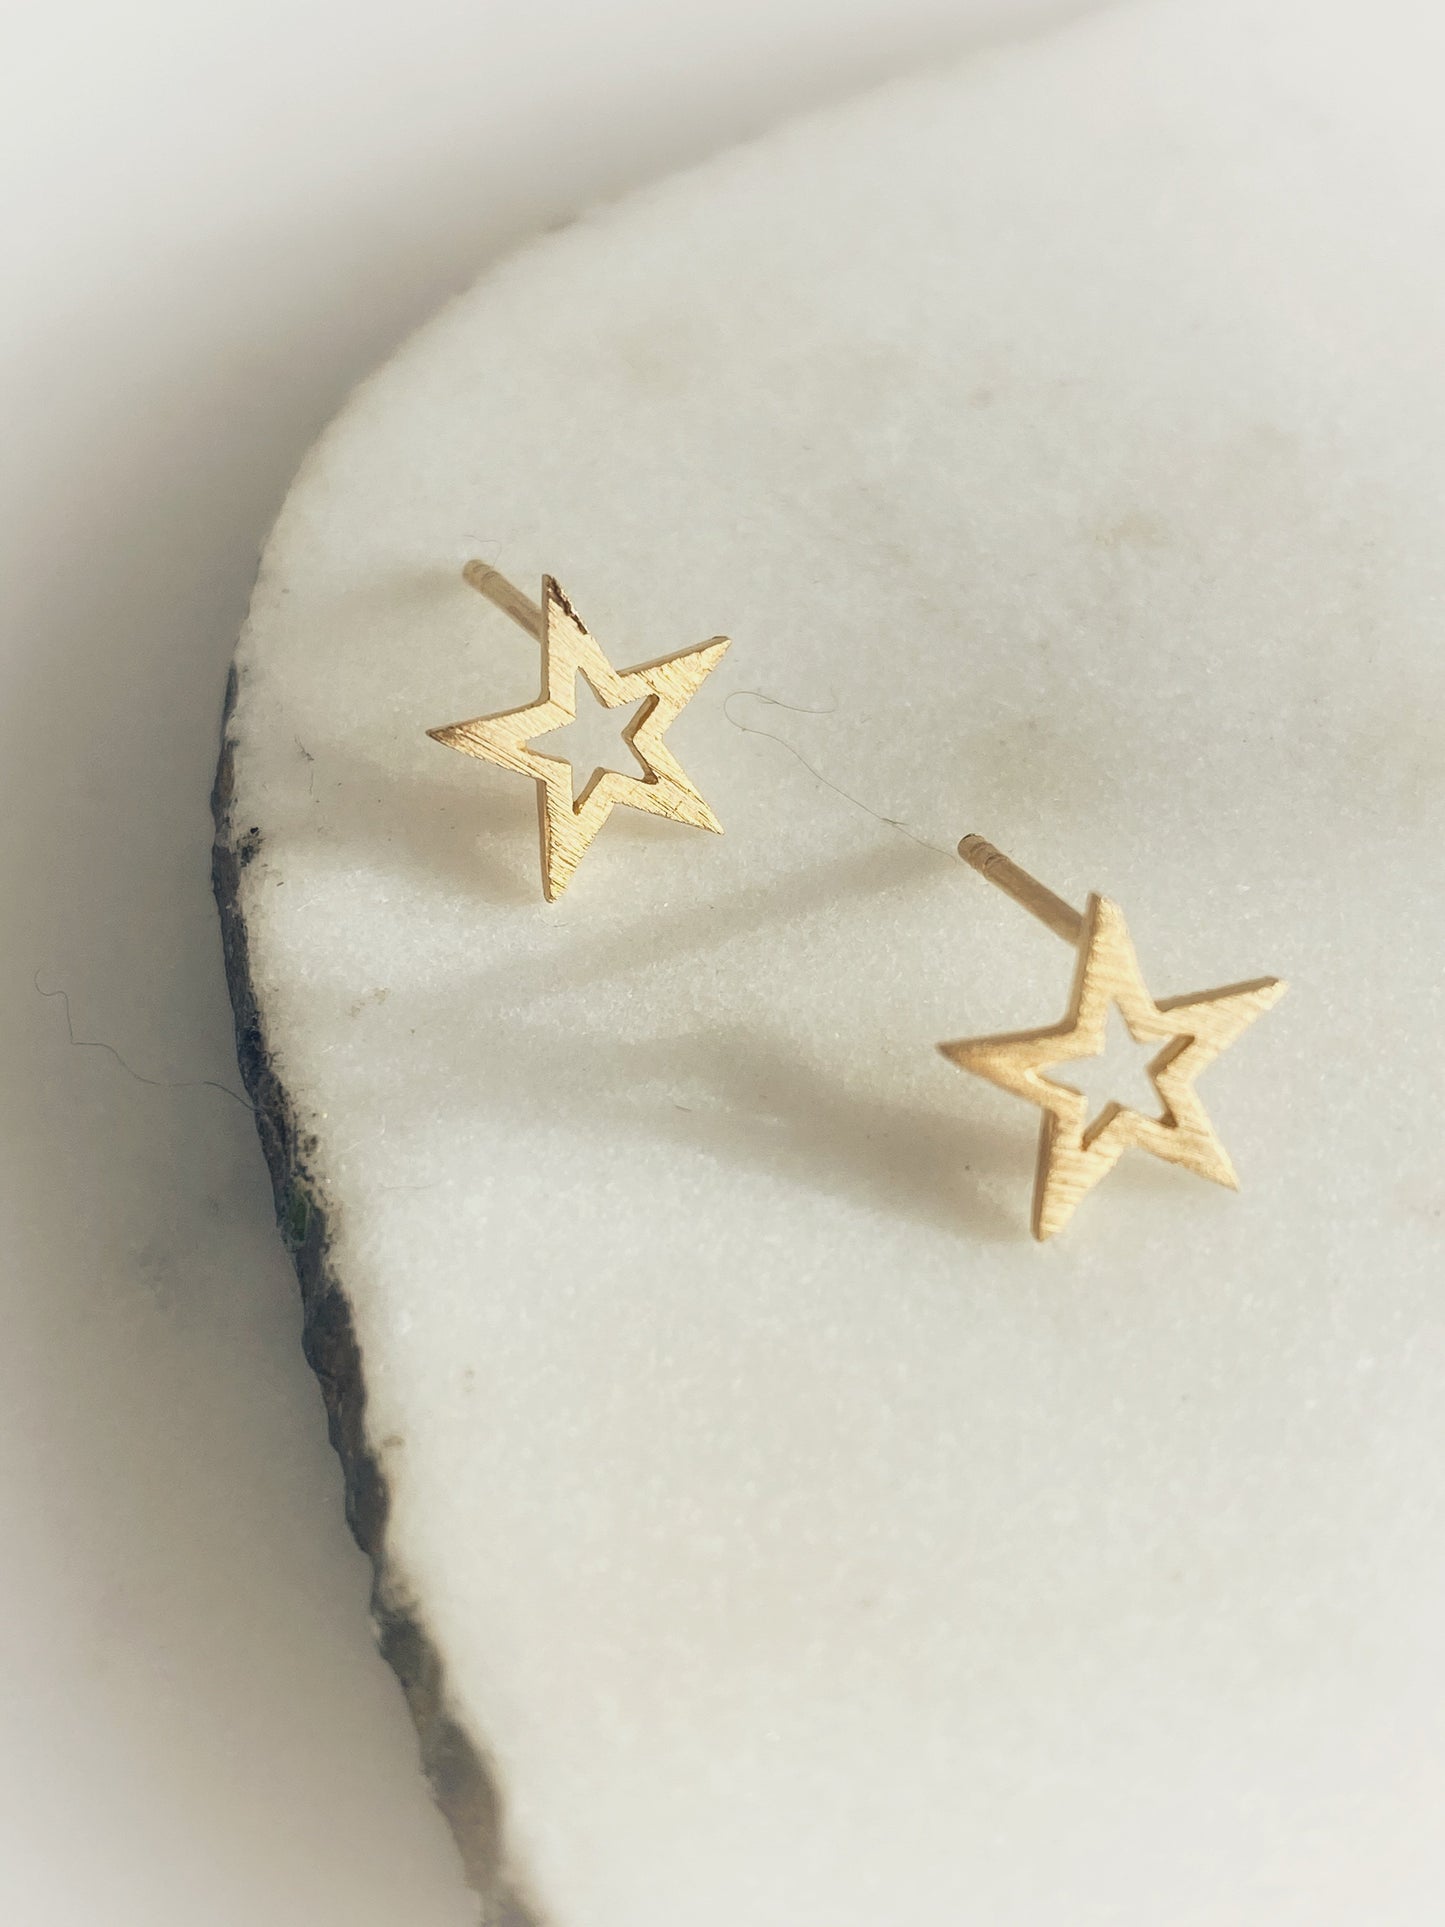 Close up of Small Star Stud earrings